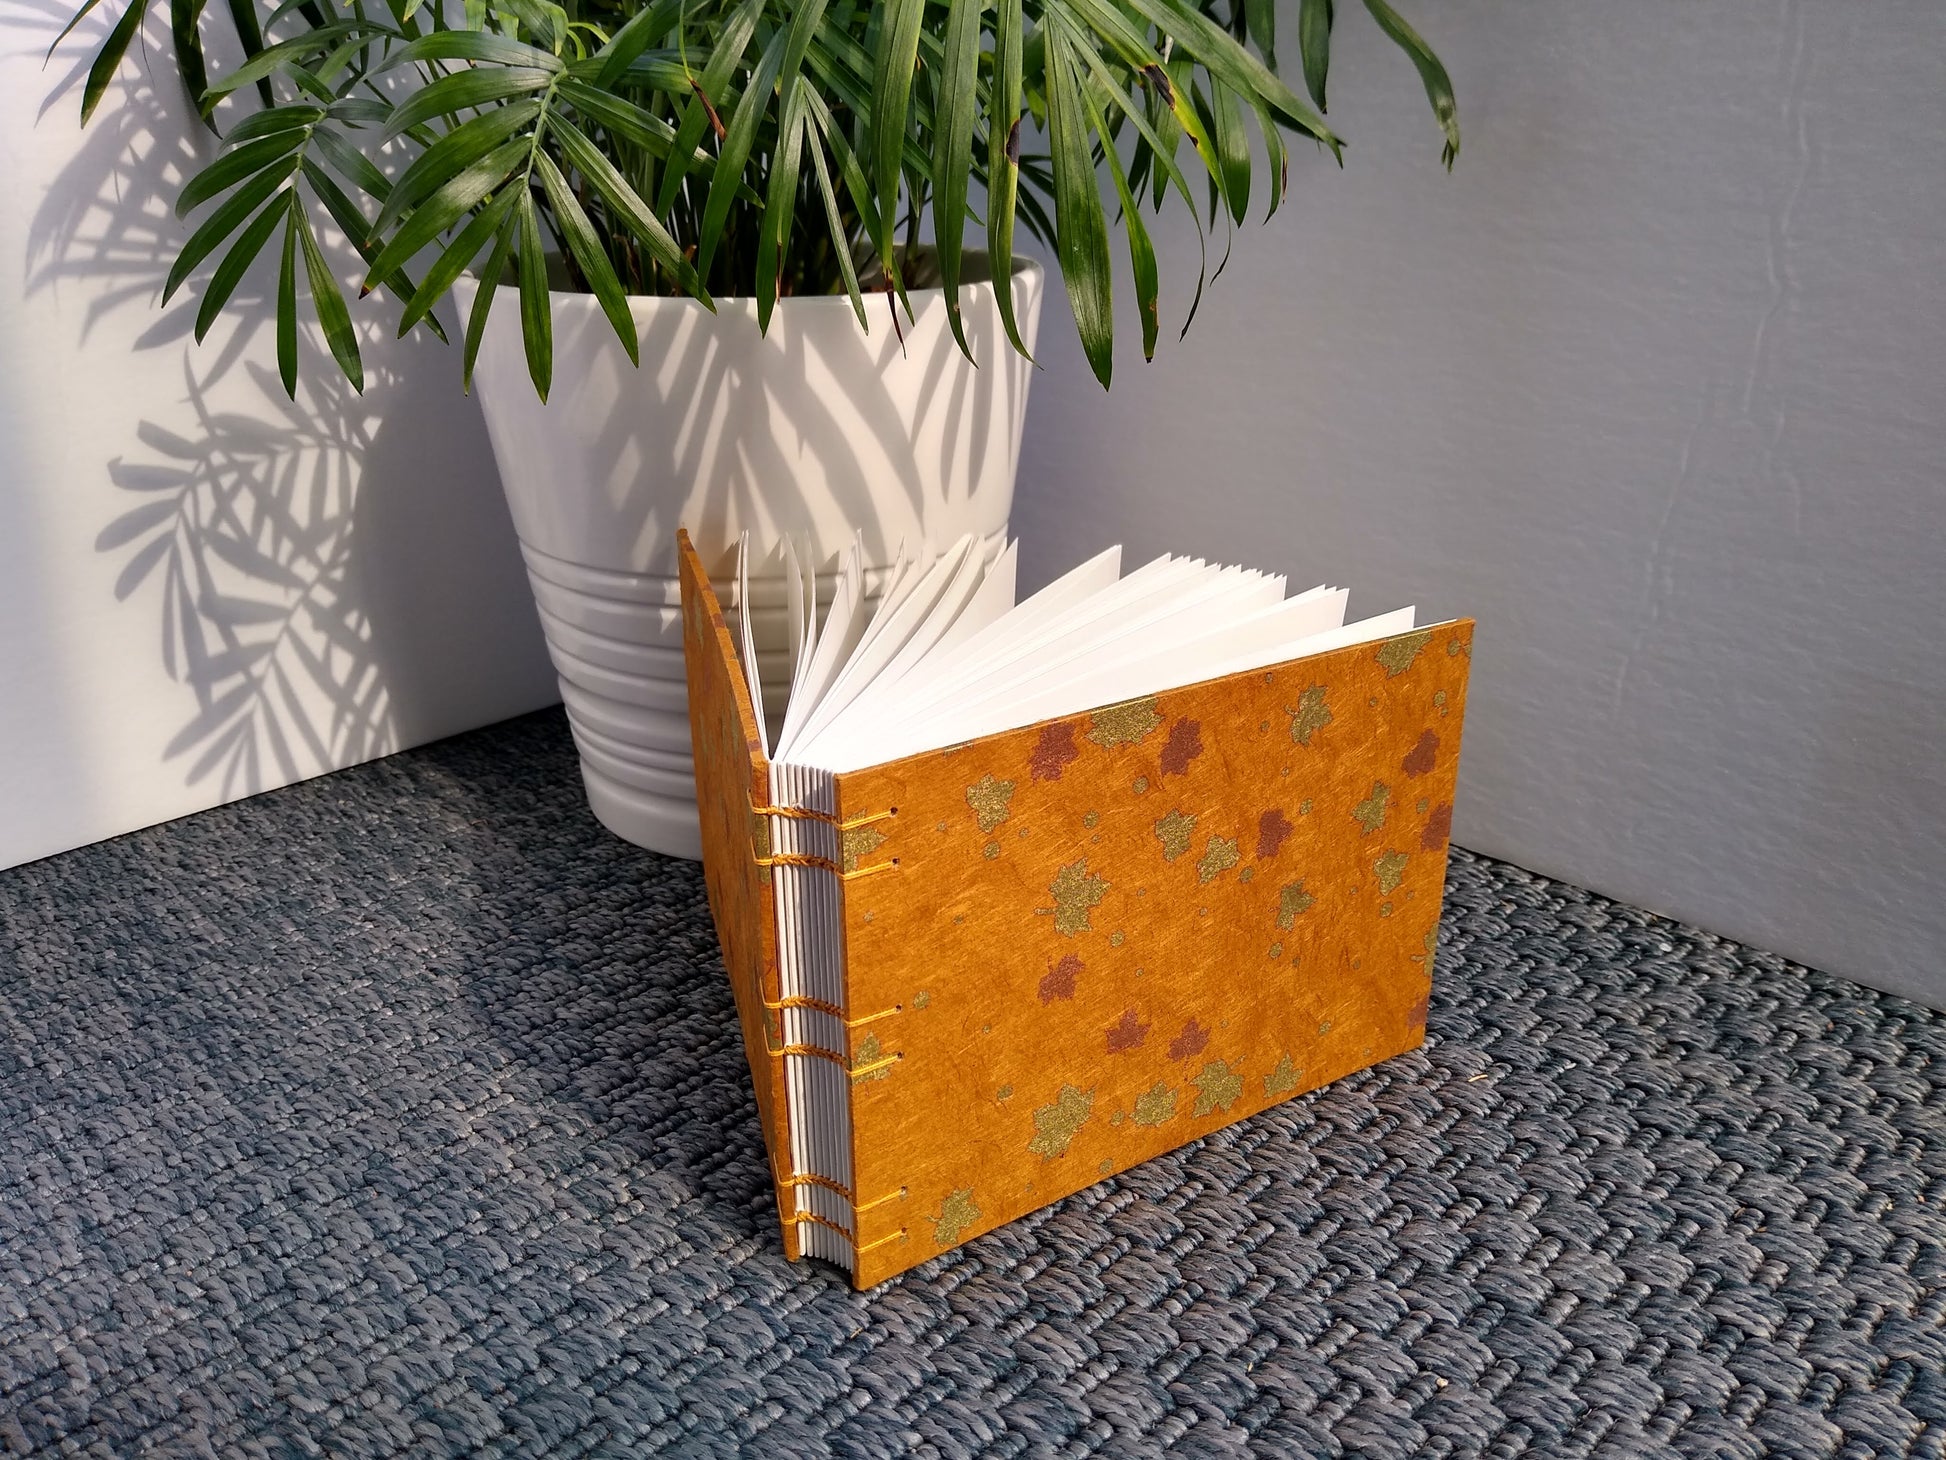 A handmade journal sits upright beside a potted plant. The cover of the journal is burnt orange with gold and copper maple leaves. It is angled to show the open spine held together with orange stitching.